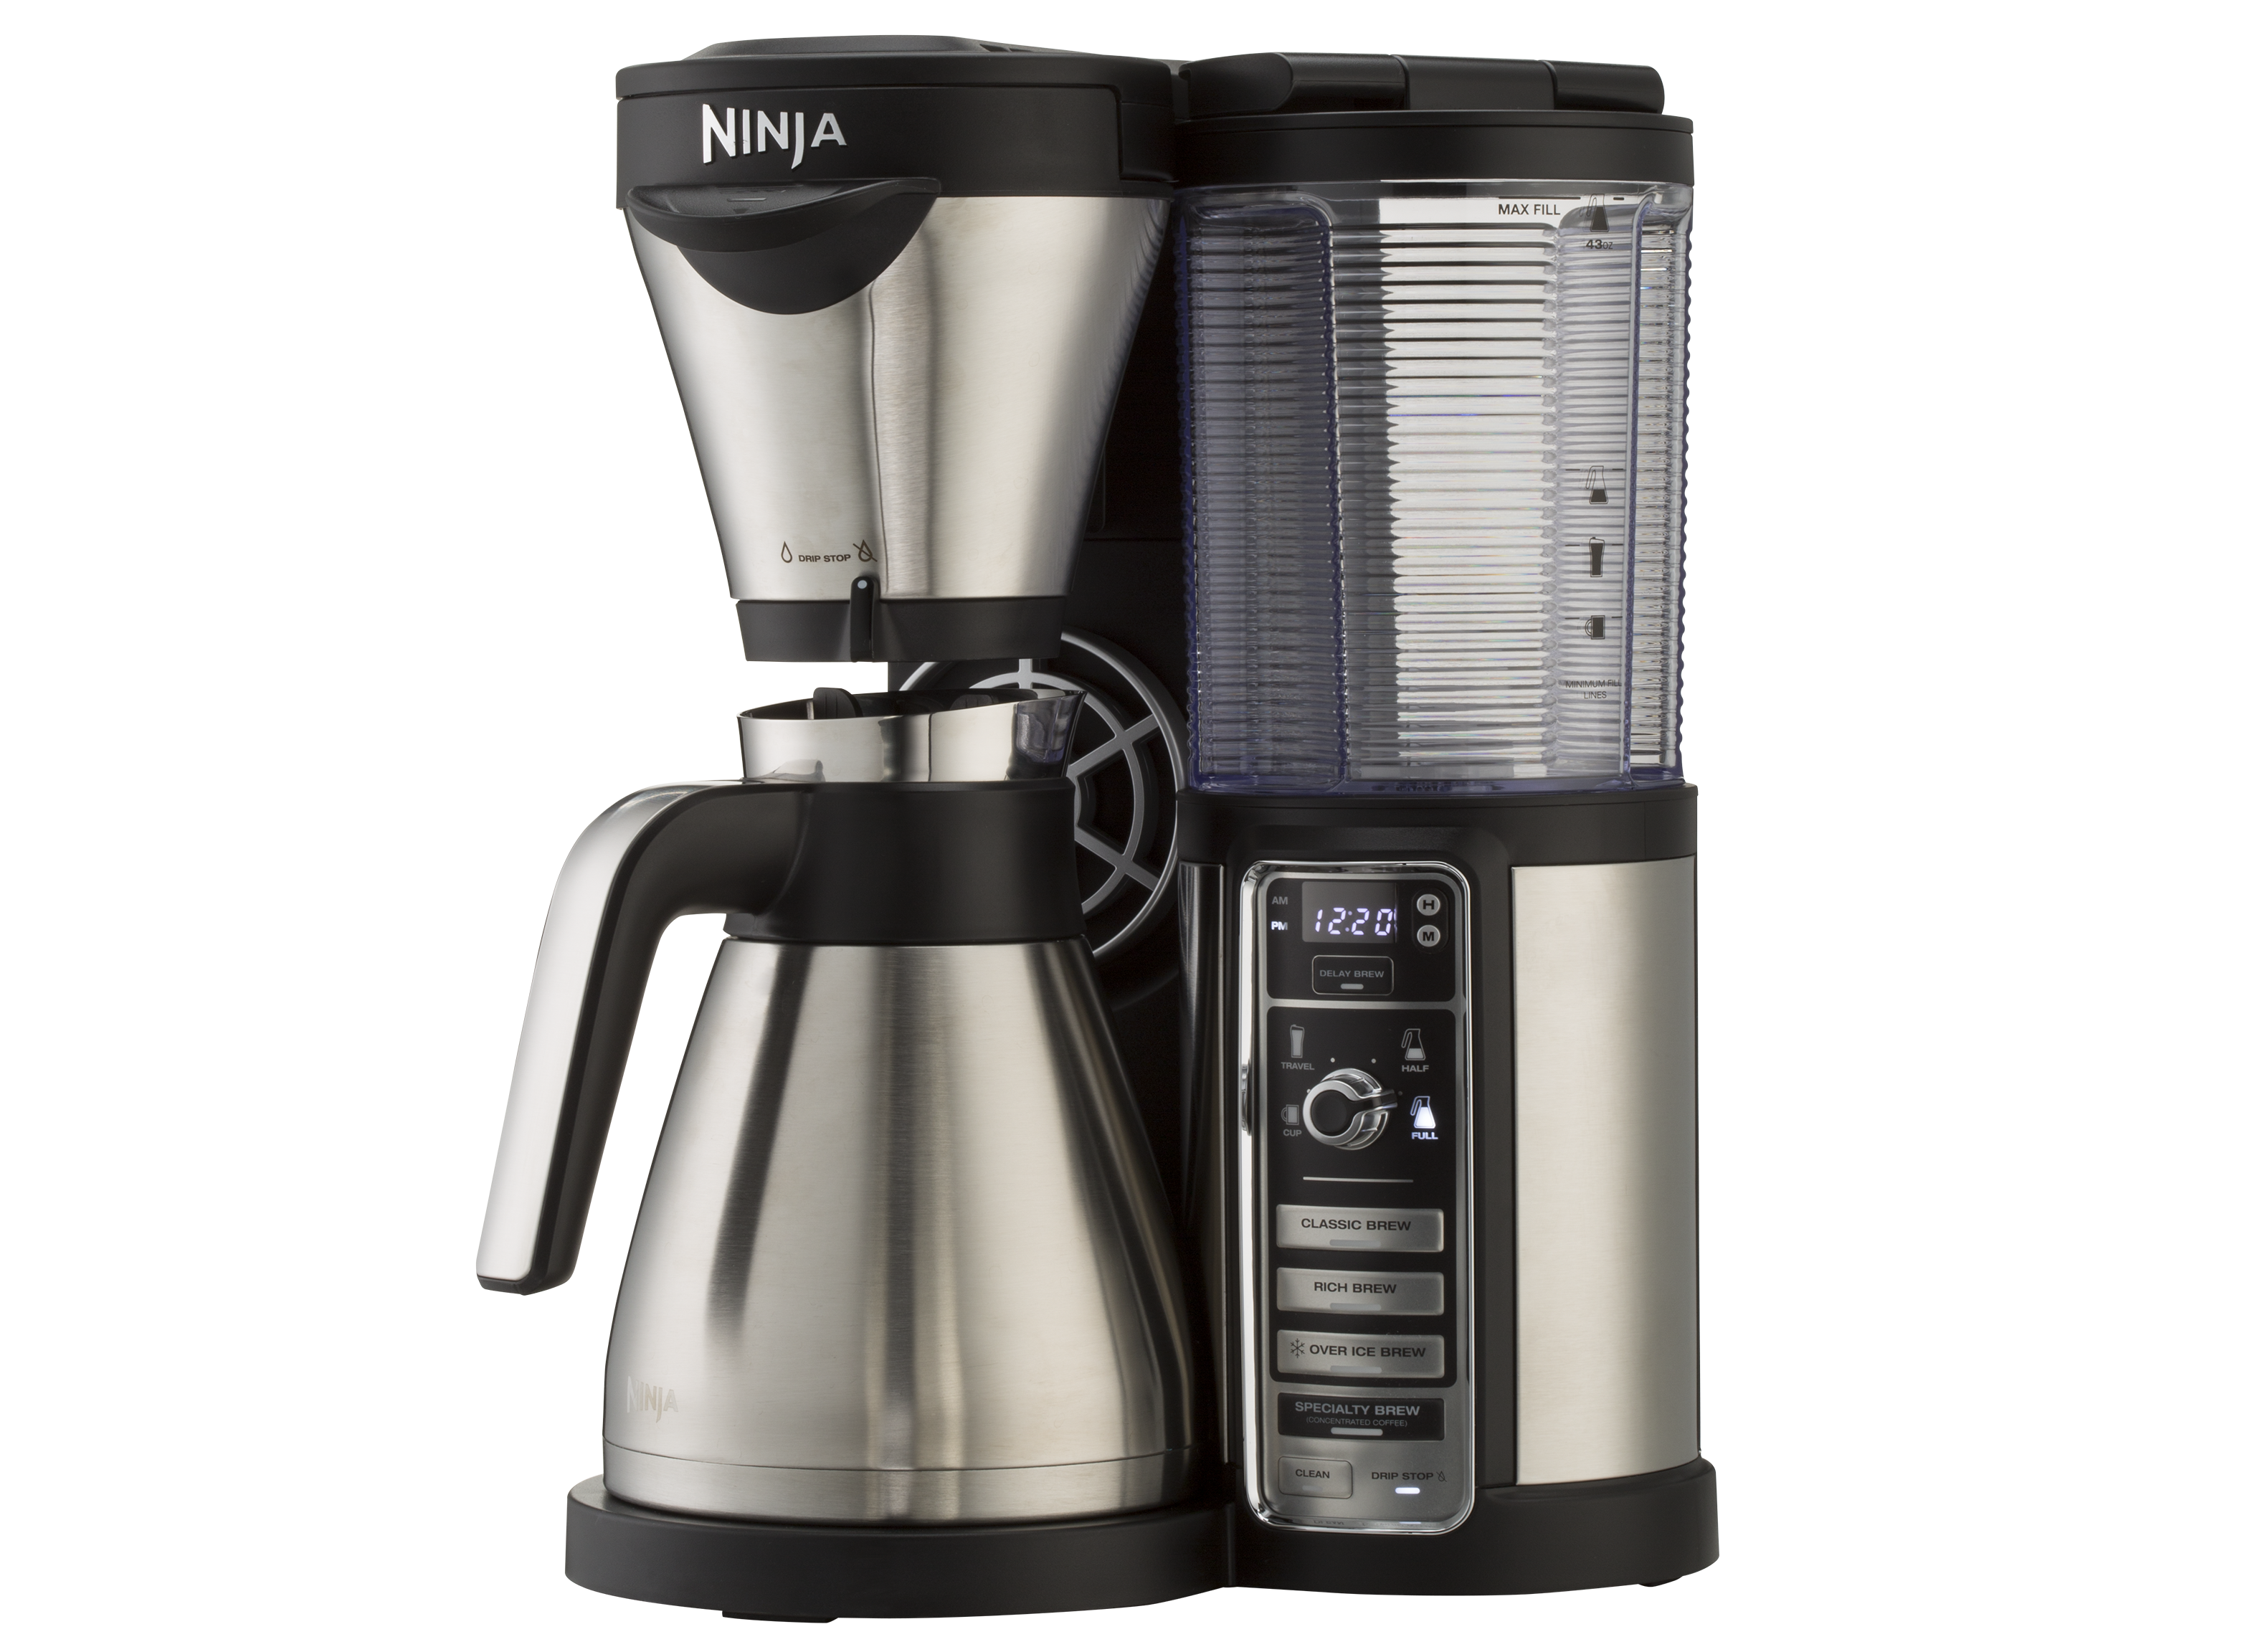 https://crdms.images.consumerreports.org/prod/products/cr/models/384631-coffeemakers-ninja-barbrewercf085.png